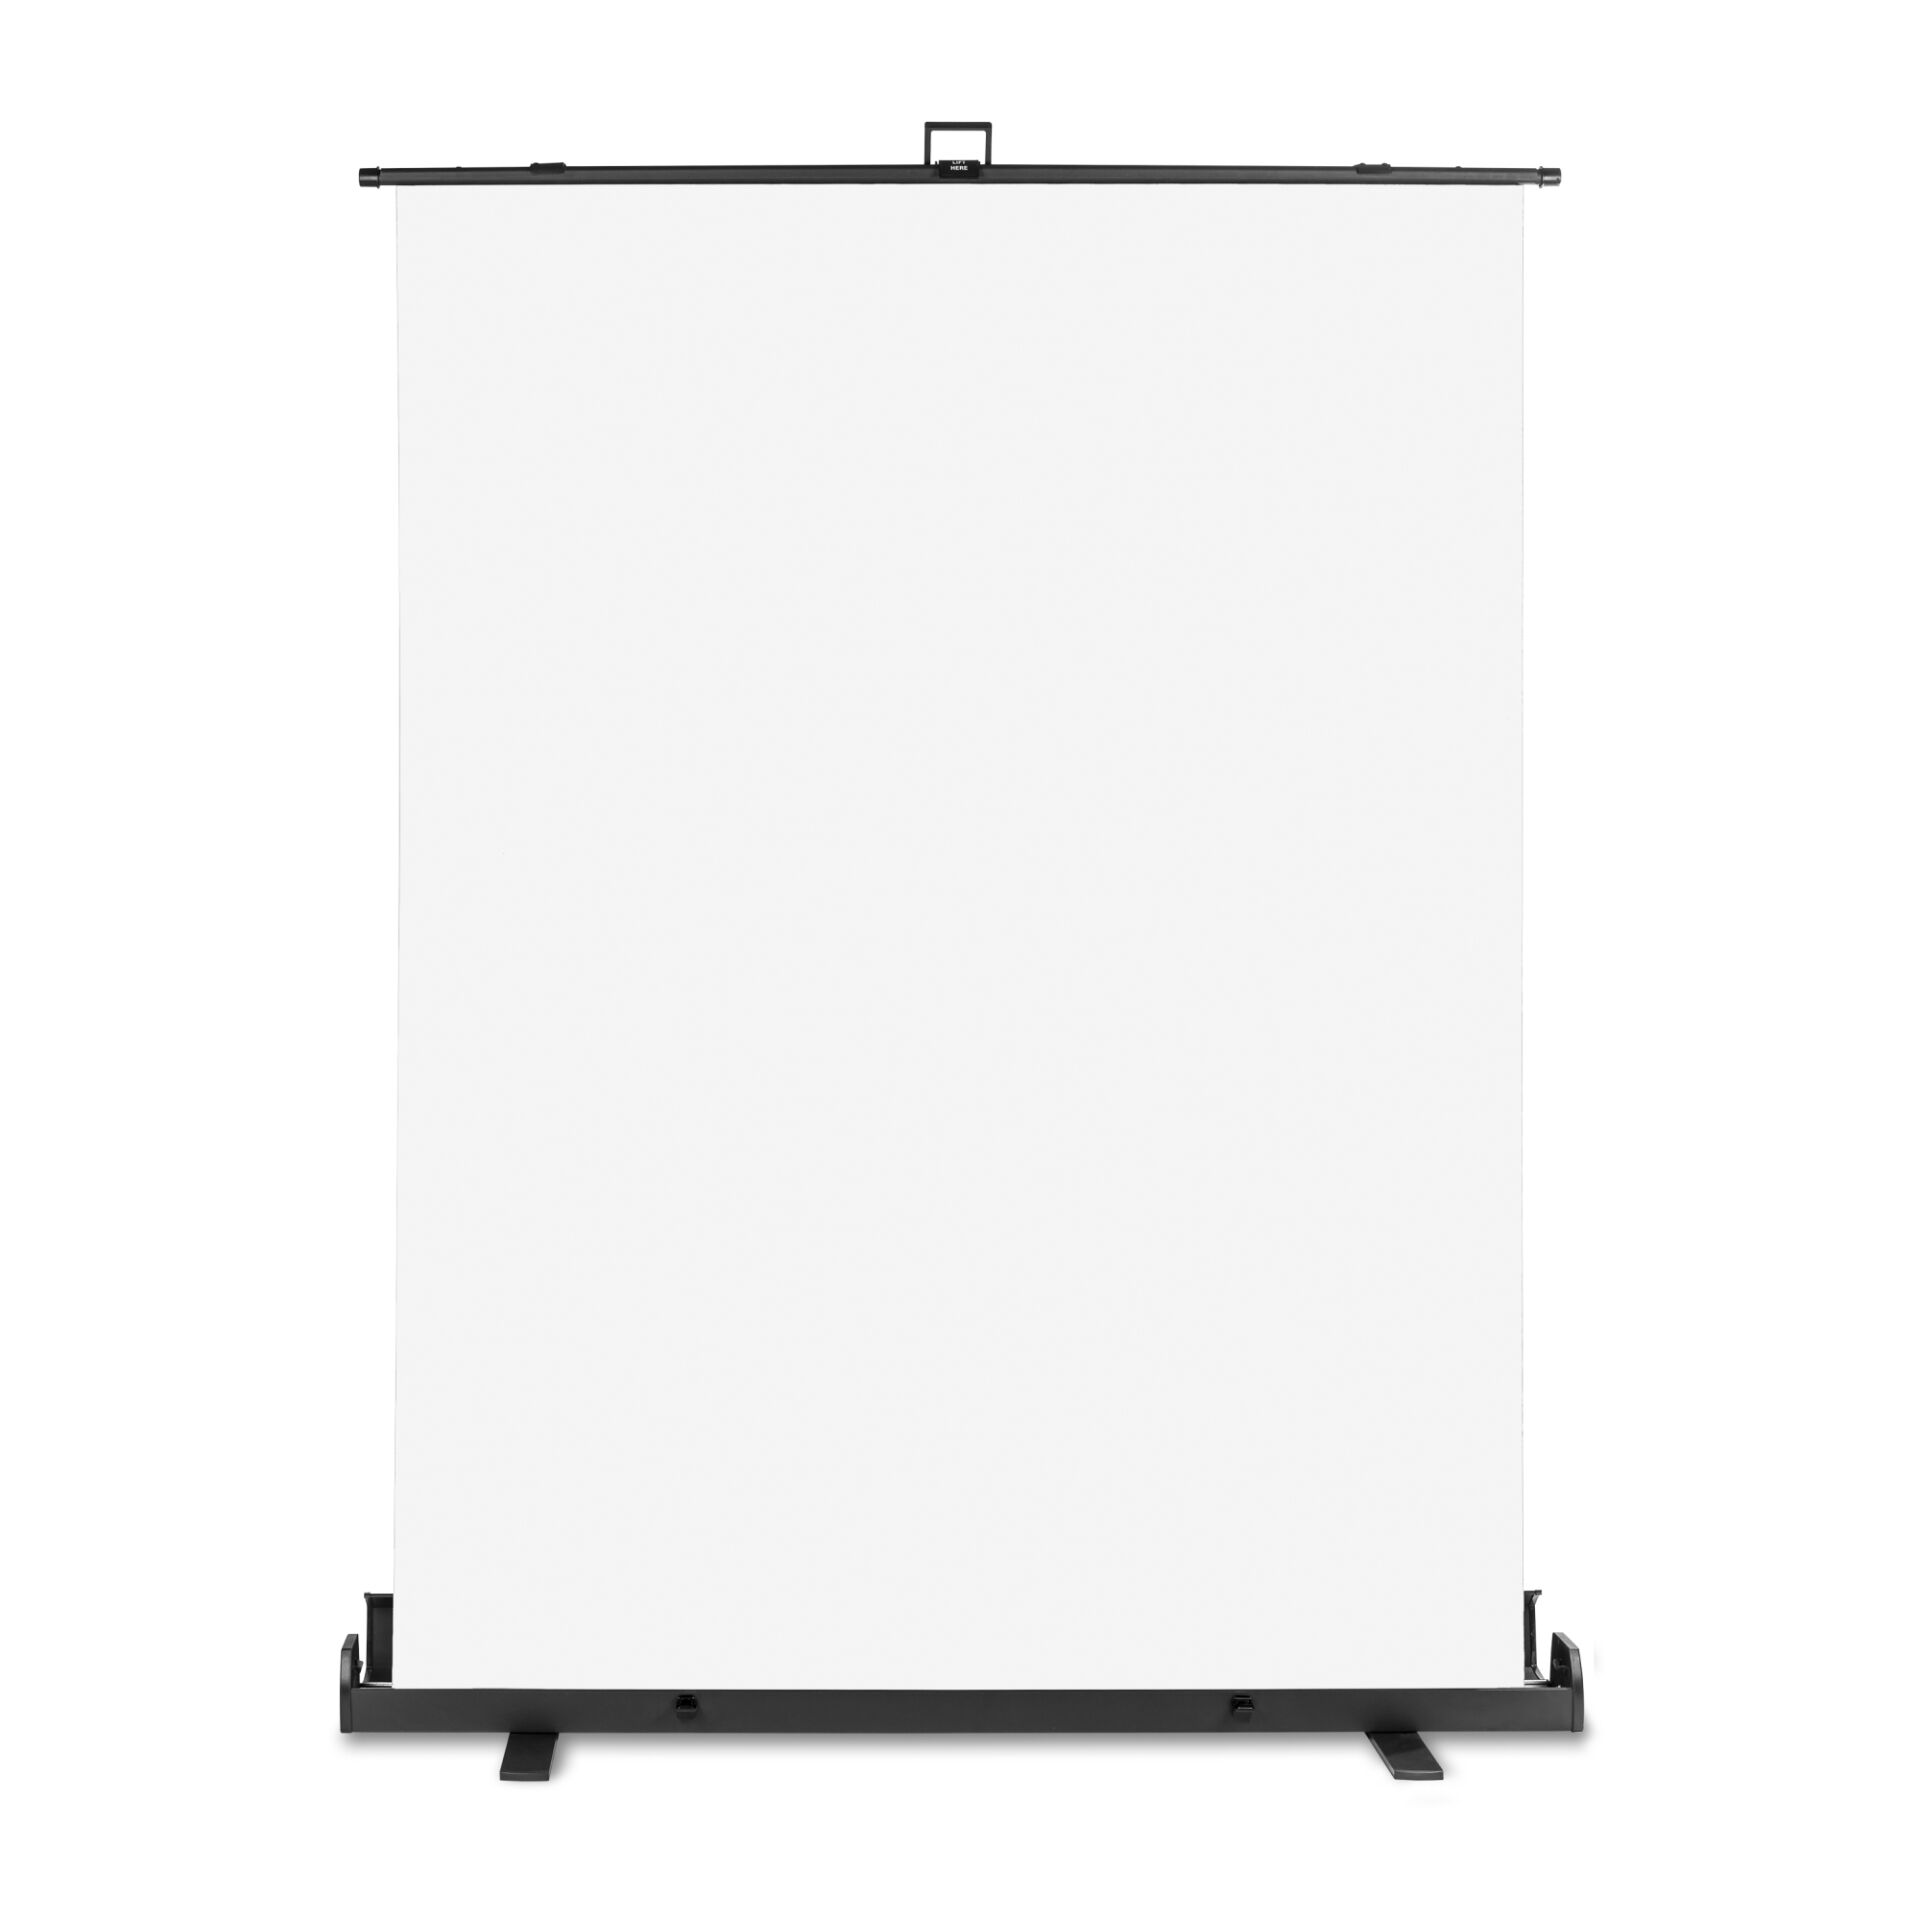 Walimex pro Roll-up Panel Background 155x200cm white